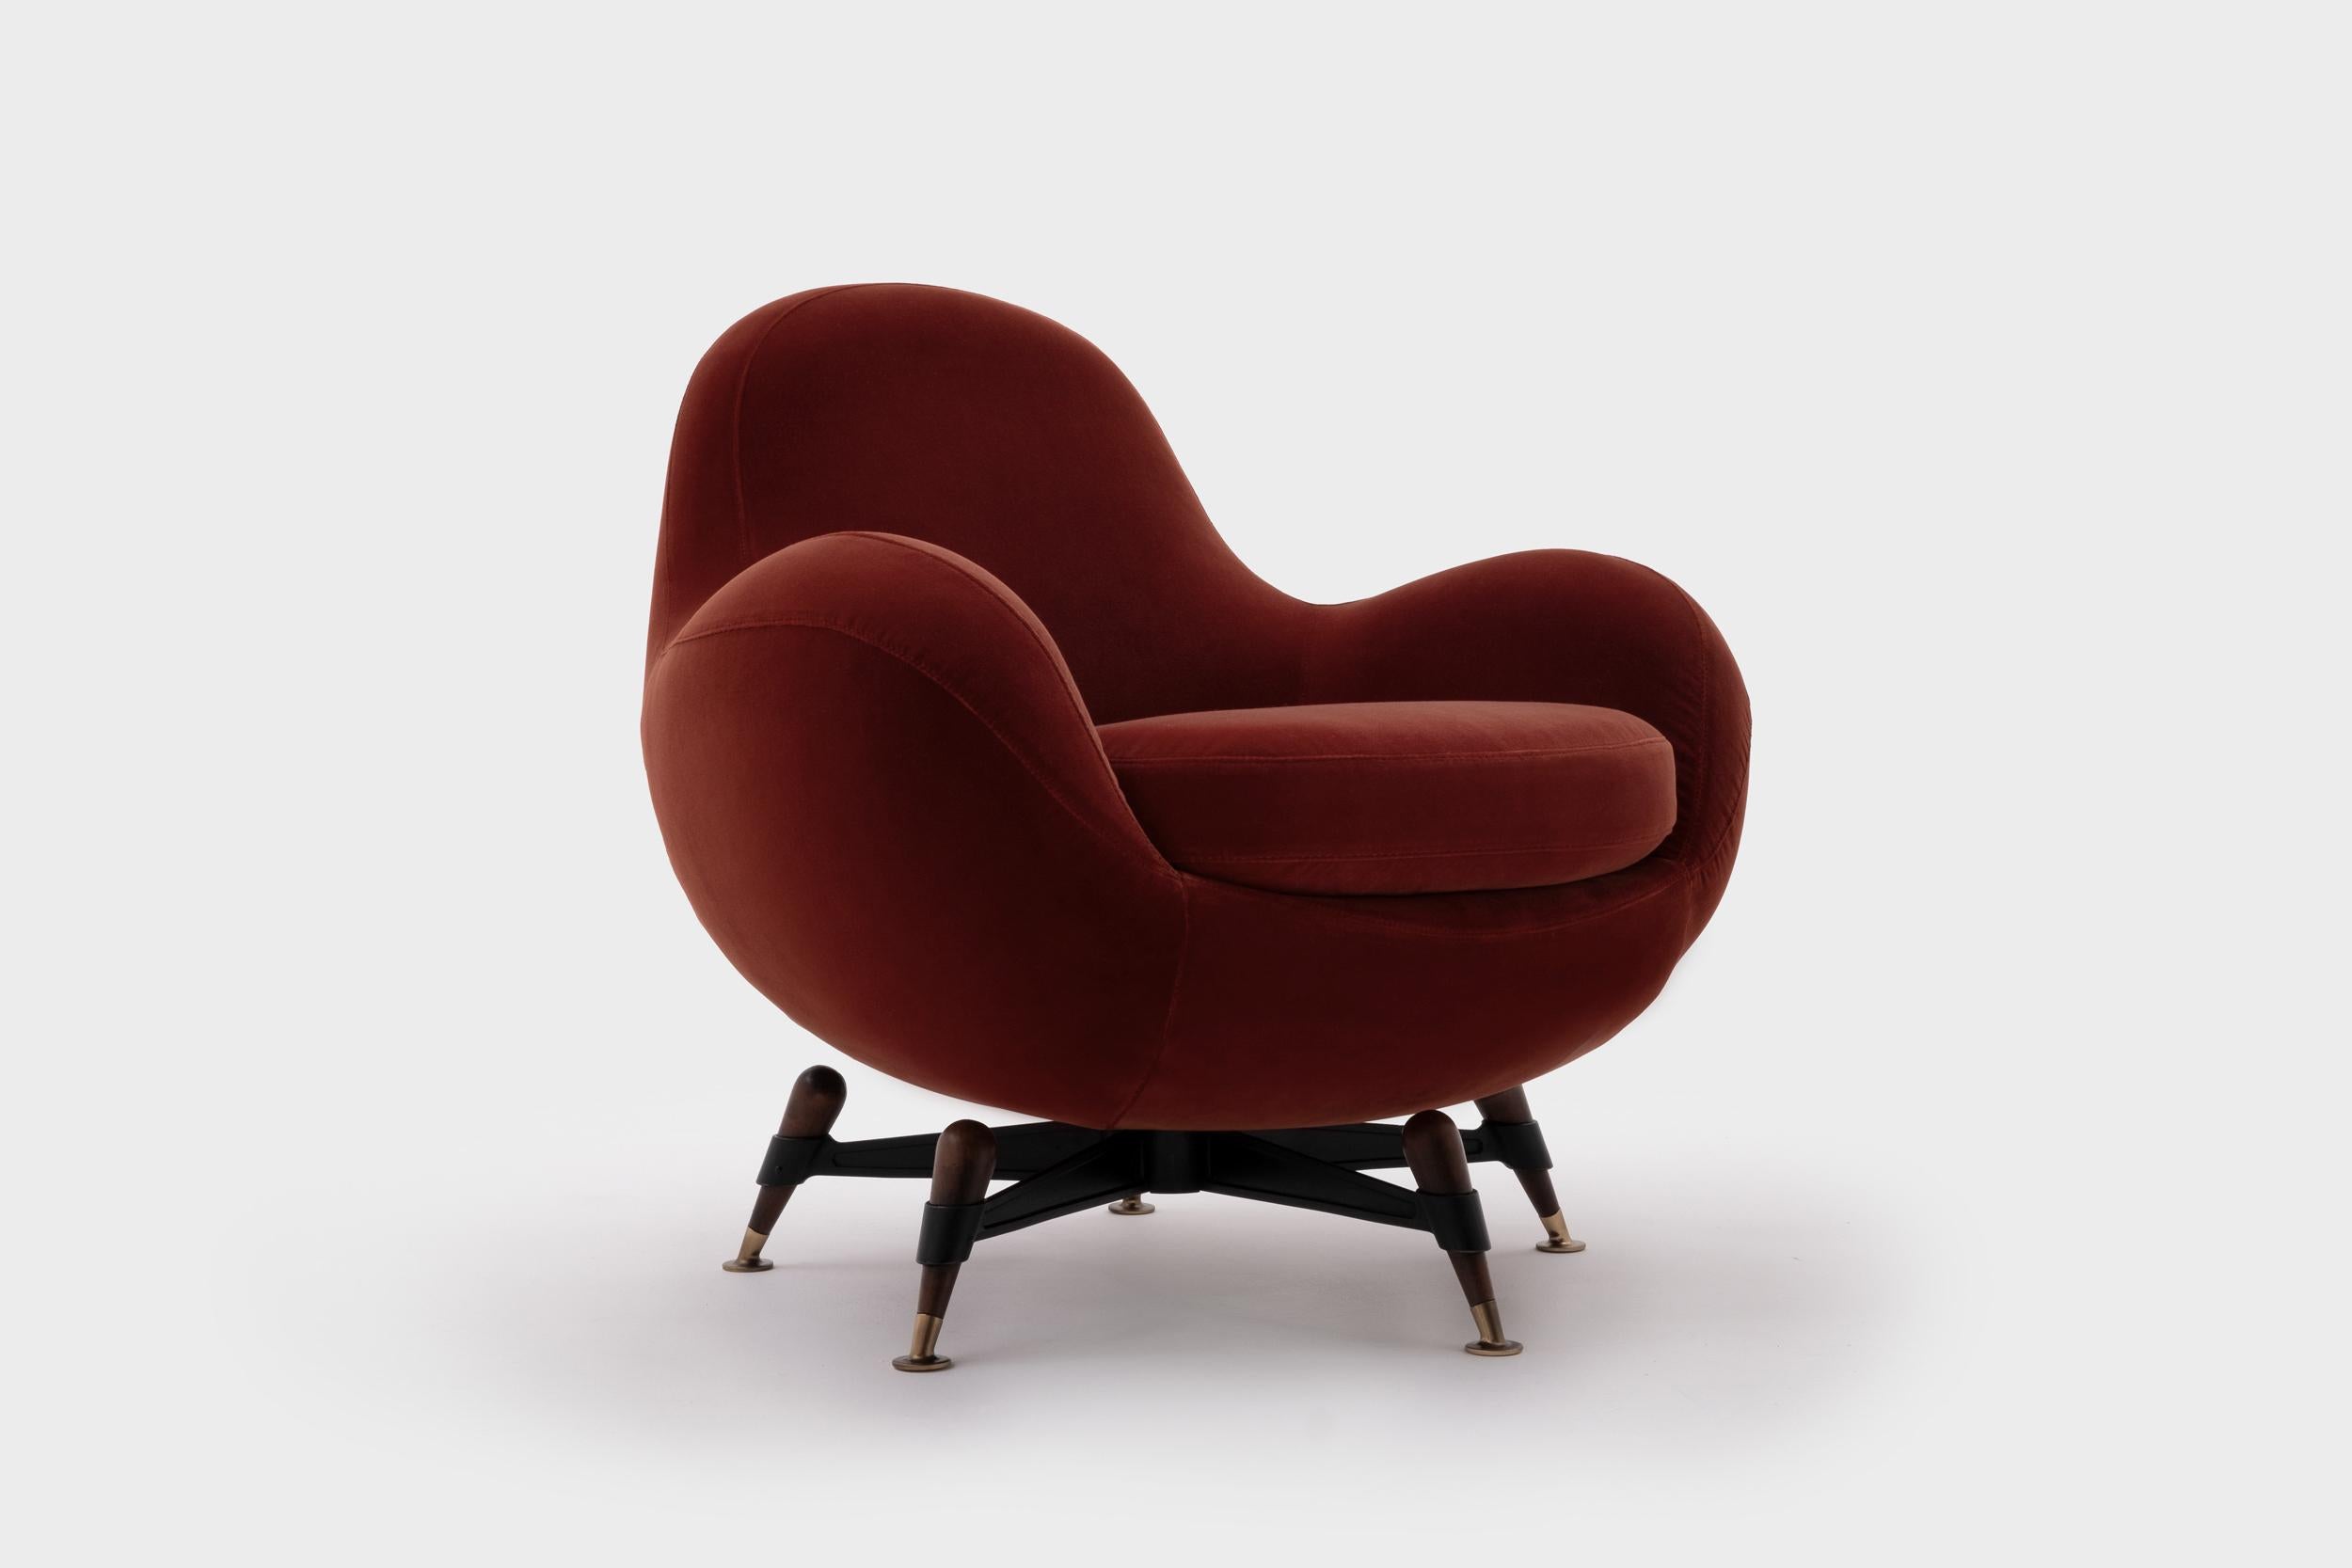 Stunning 'Mercury' lounge chair by Rito Valla for IPE Bologna, Italy 1963. One of the best designs produced by IPE (Imbottiture Prodotti Espansi). Hard to find design object; only produced for two years. Distinguished bold shaped form on an